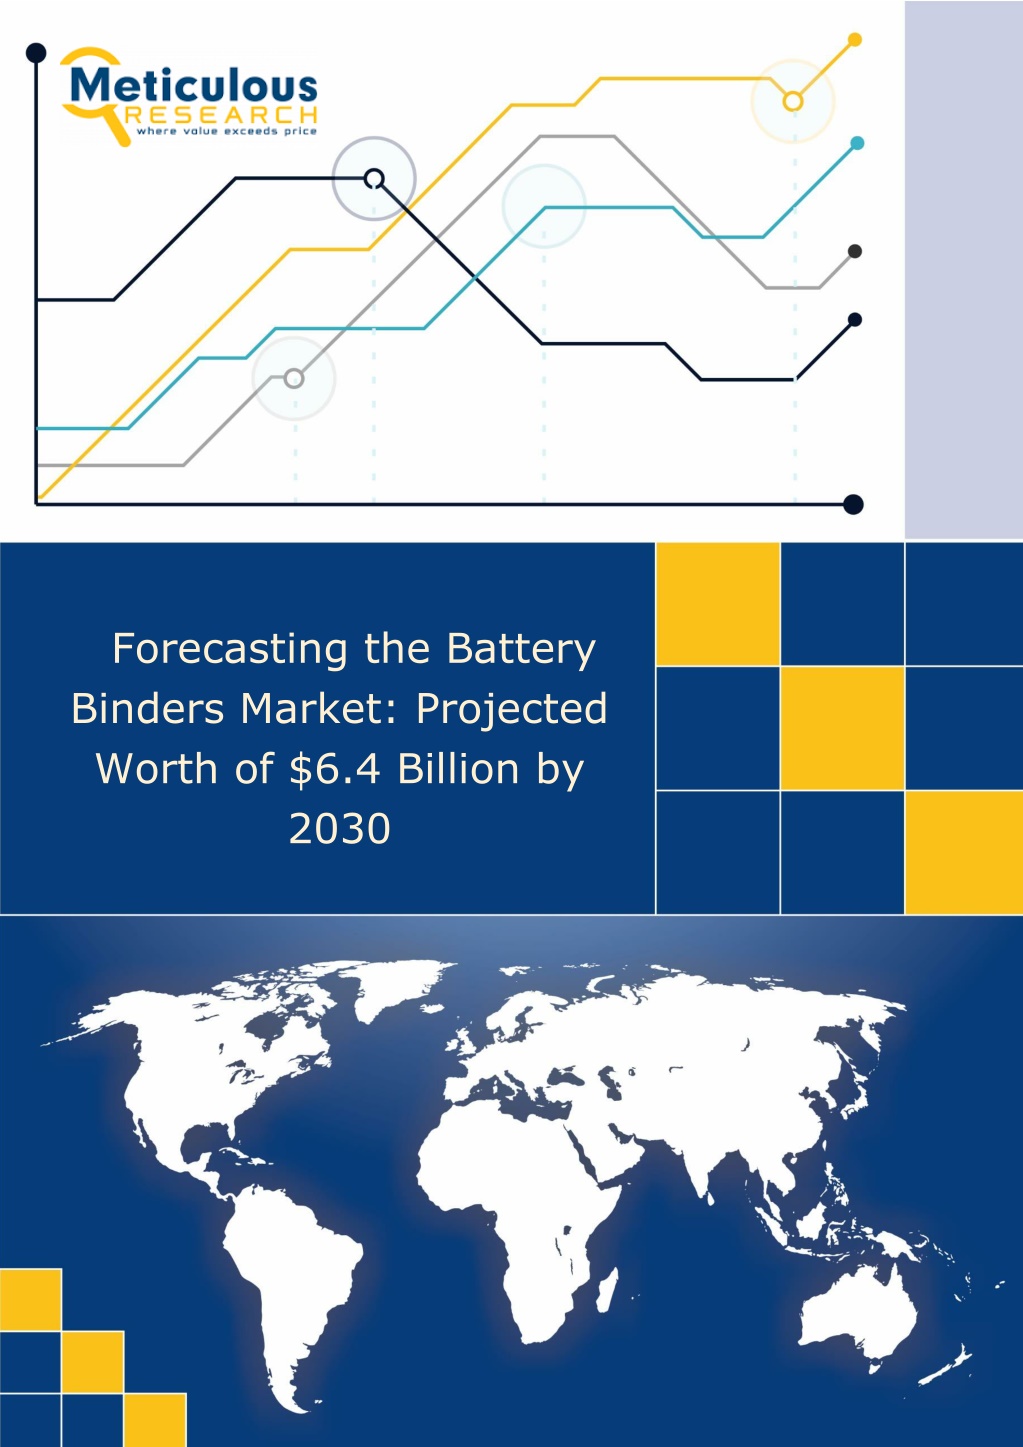 forecasting the battery binders market projected l.w